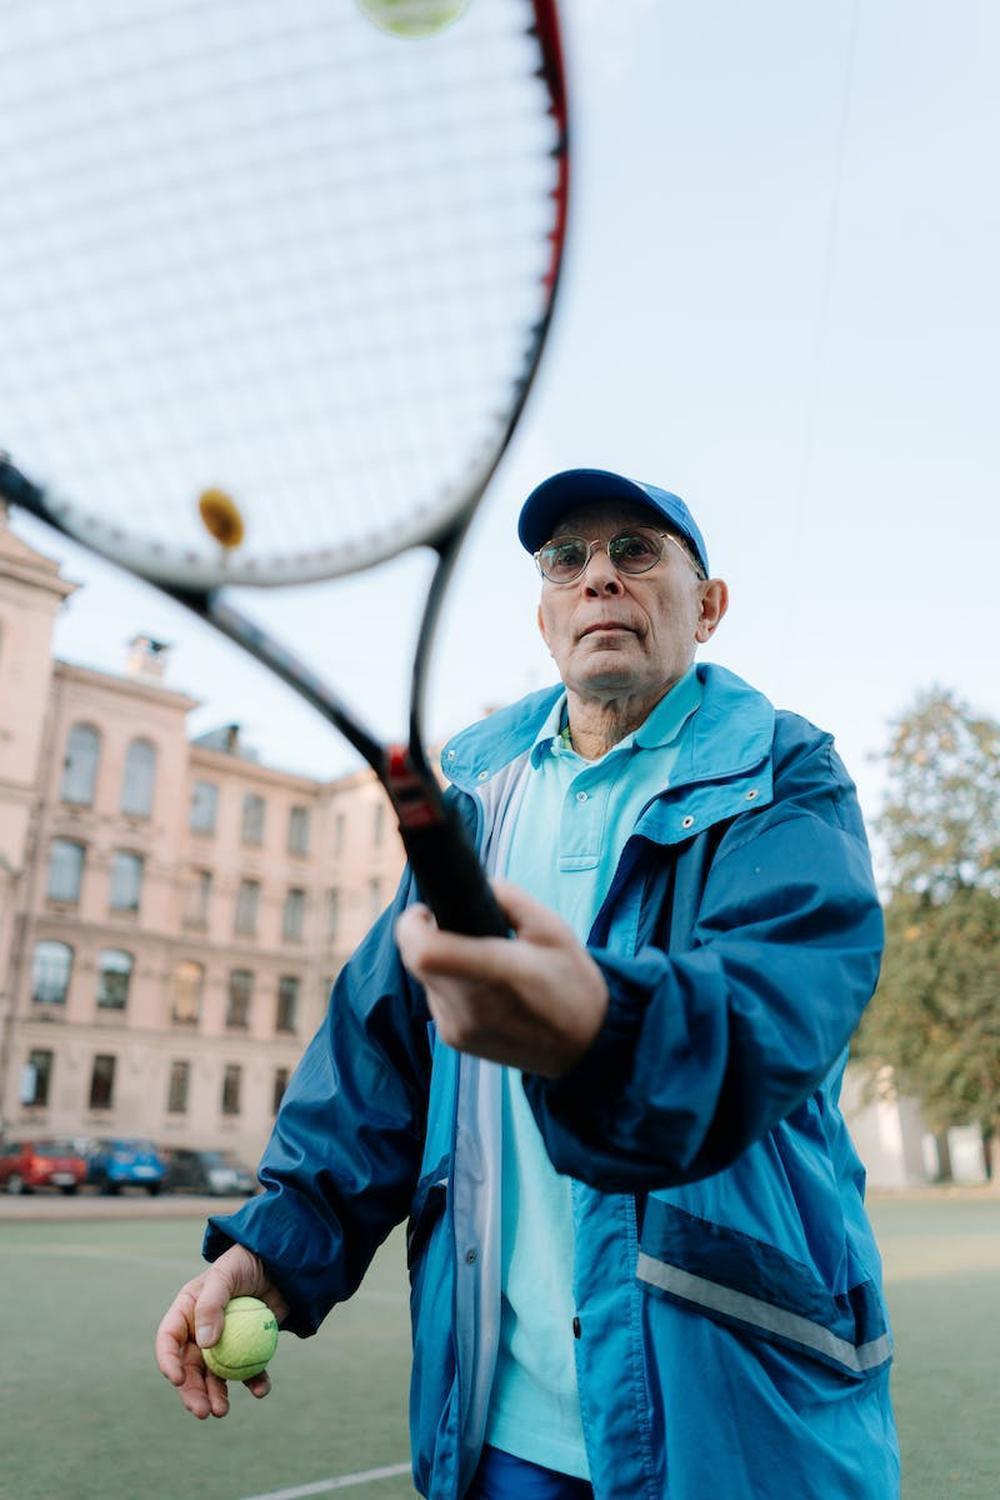 adult_man_in_blue_jacket_holding_a_tennis_racket_a